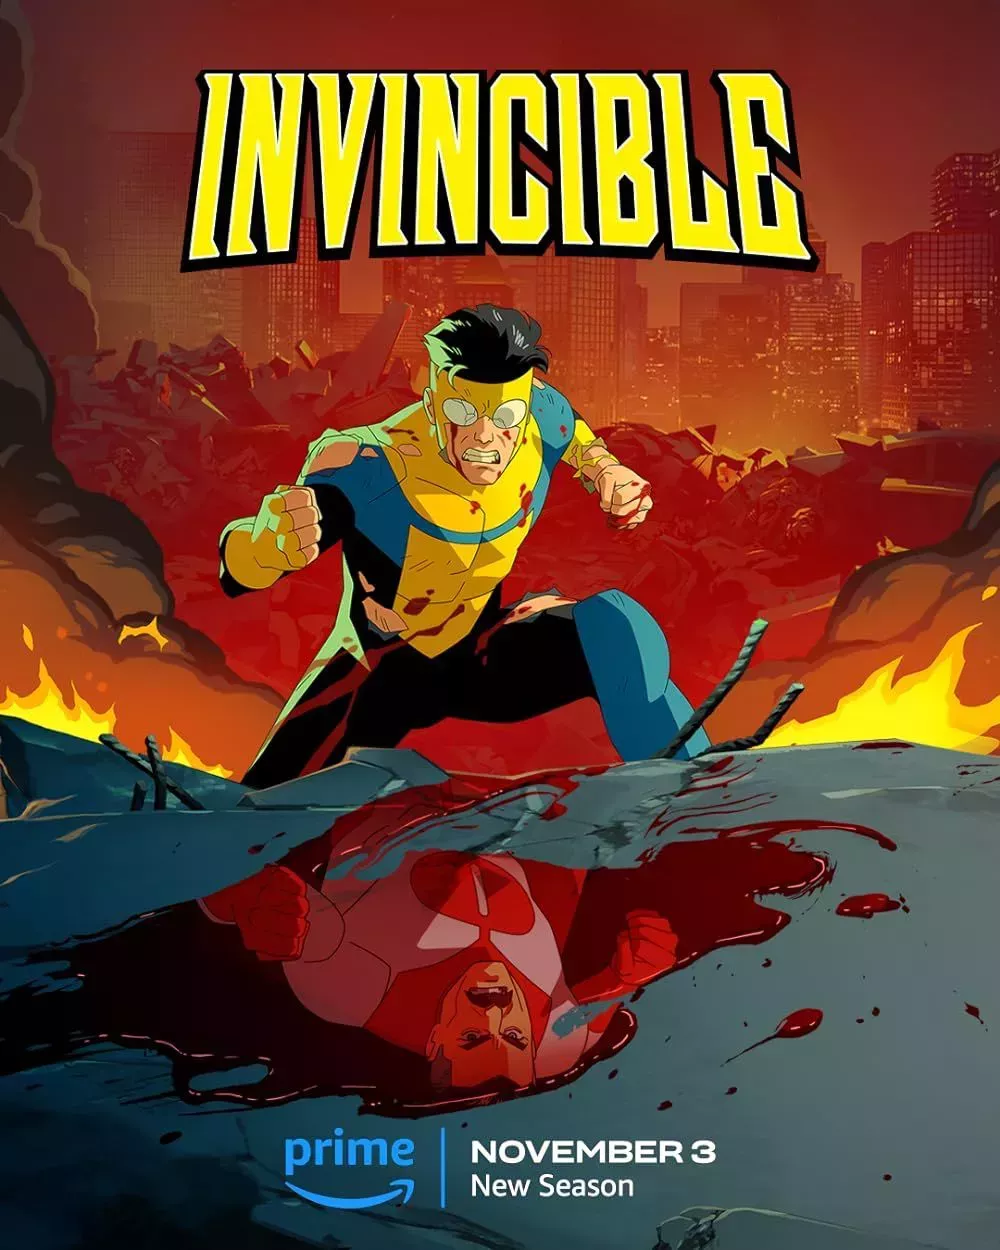 Mark Grayson Sees Reflection of His Father in Invincible Promo